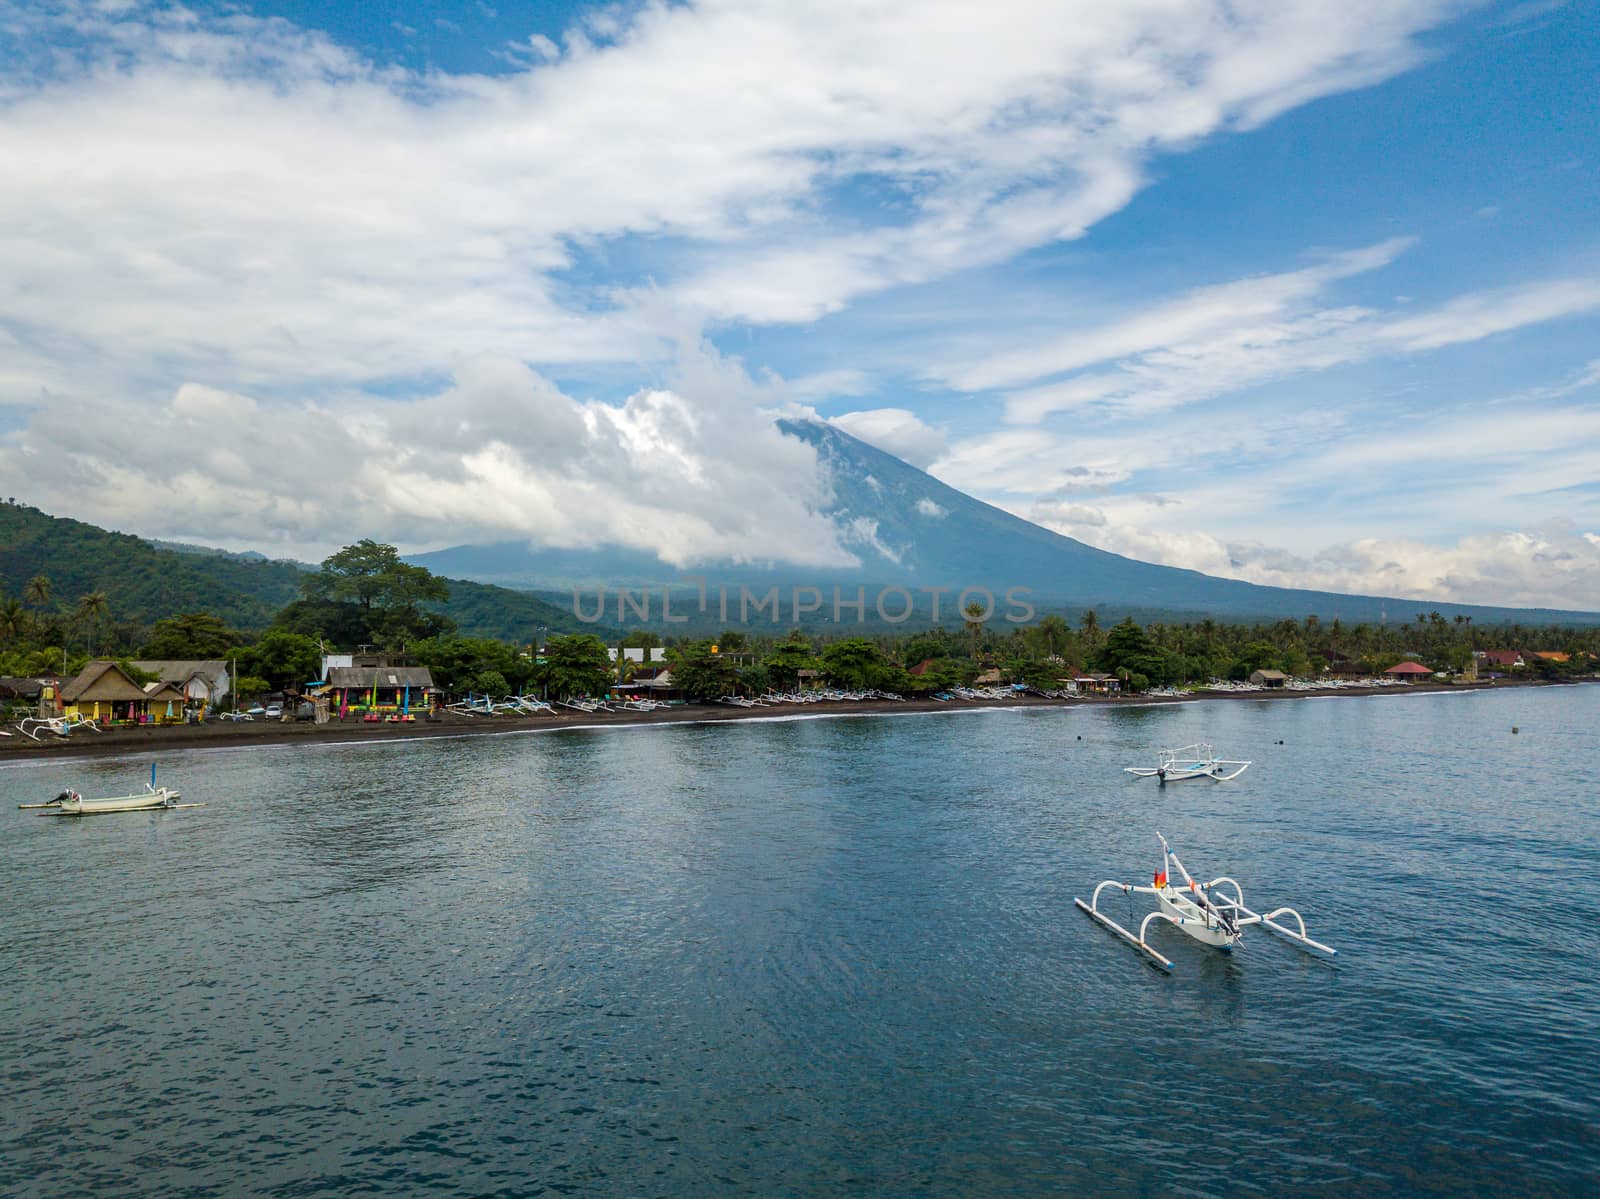 Aerial view of Amed Beach and Mount Agung volcano in Bali, Indonesia. Traditional fishing boats called jukungs in the foreground.